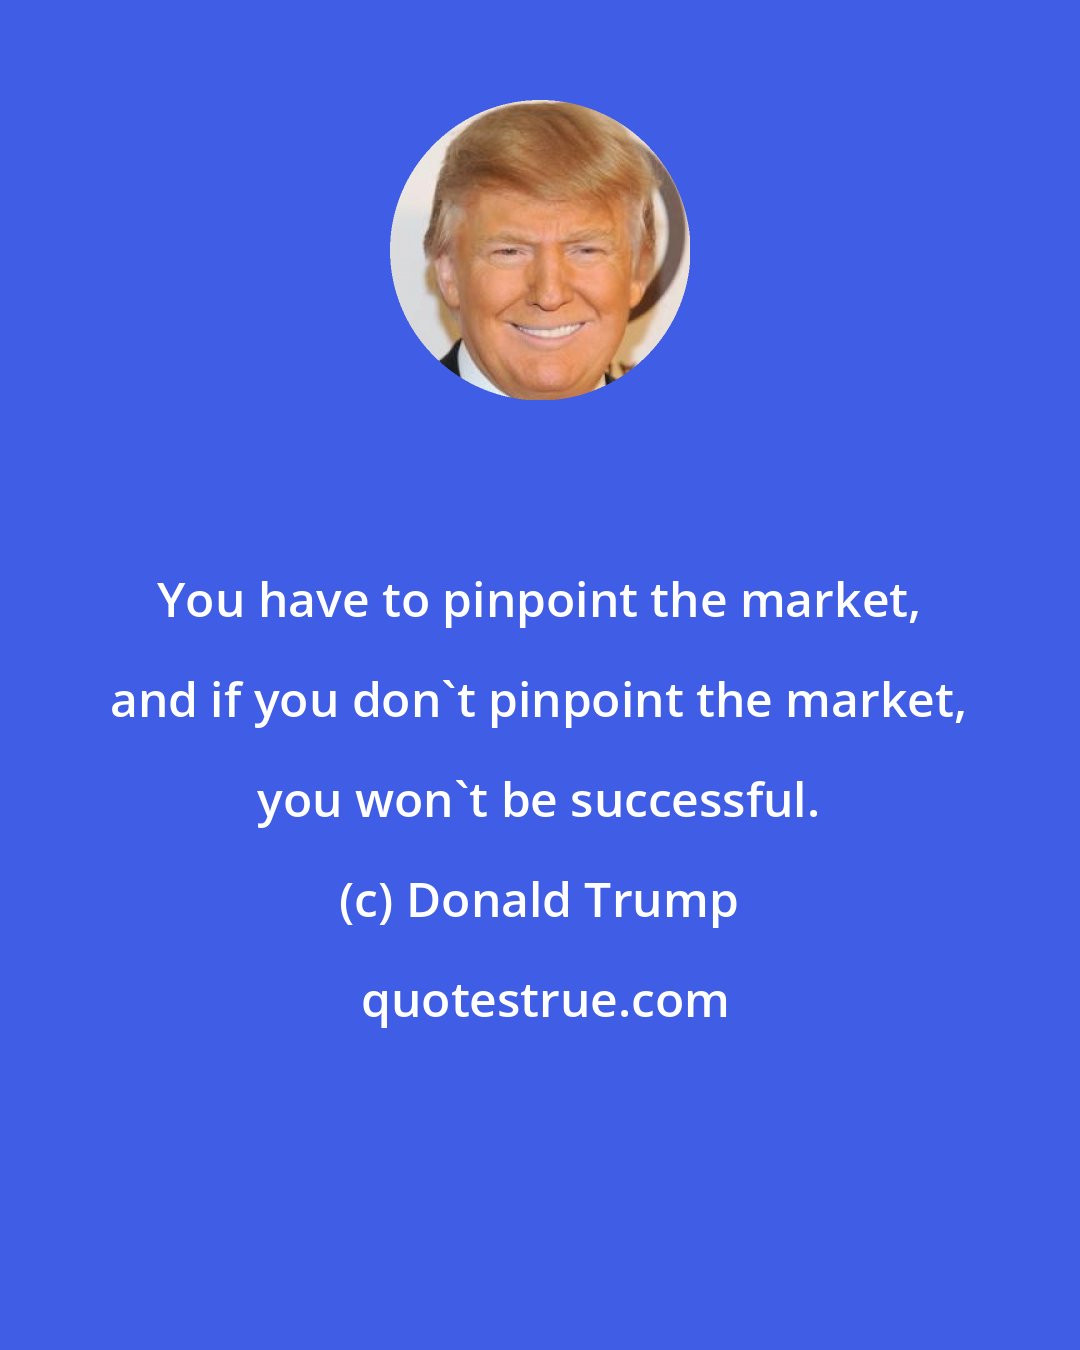 Donald Trump: You have to pinpoint the market, and if you don't pinpoint the market, you won't be successful.